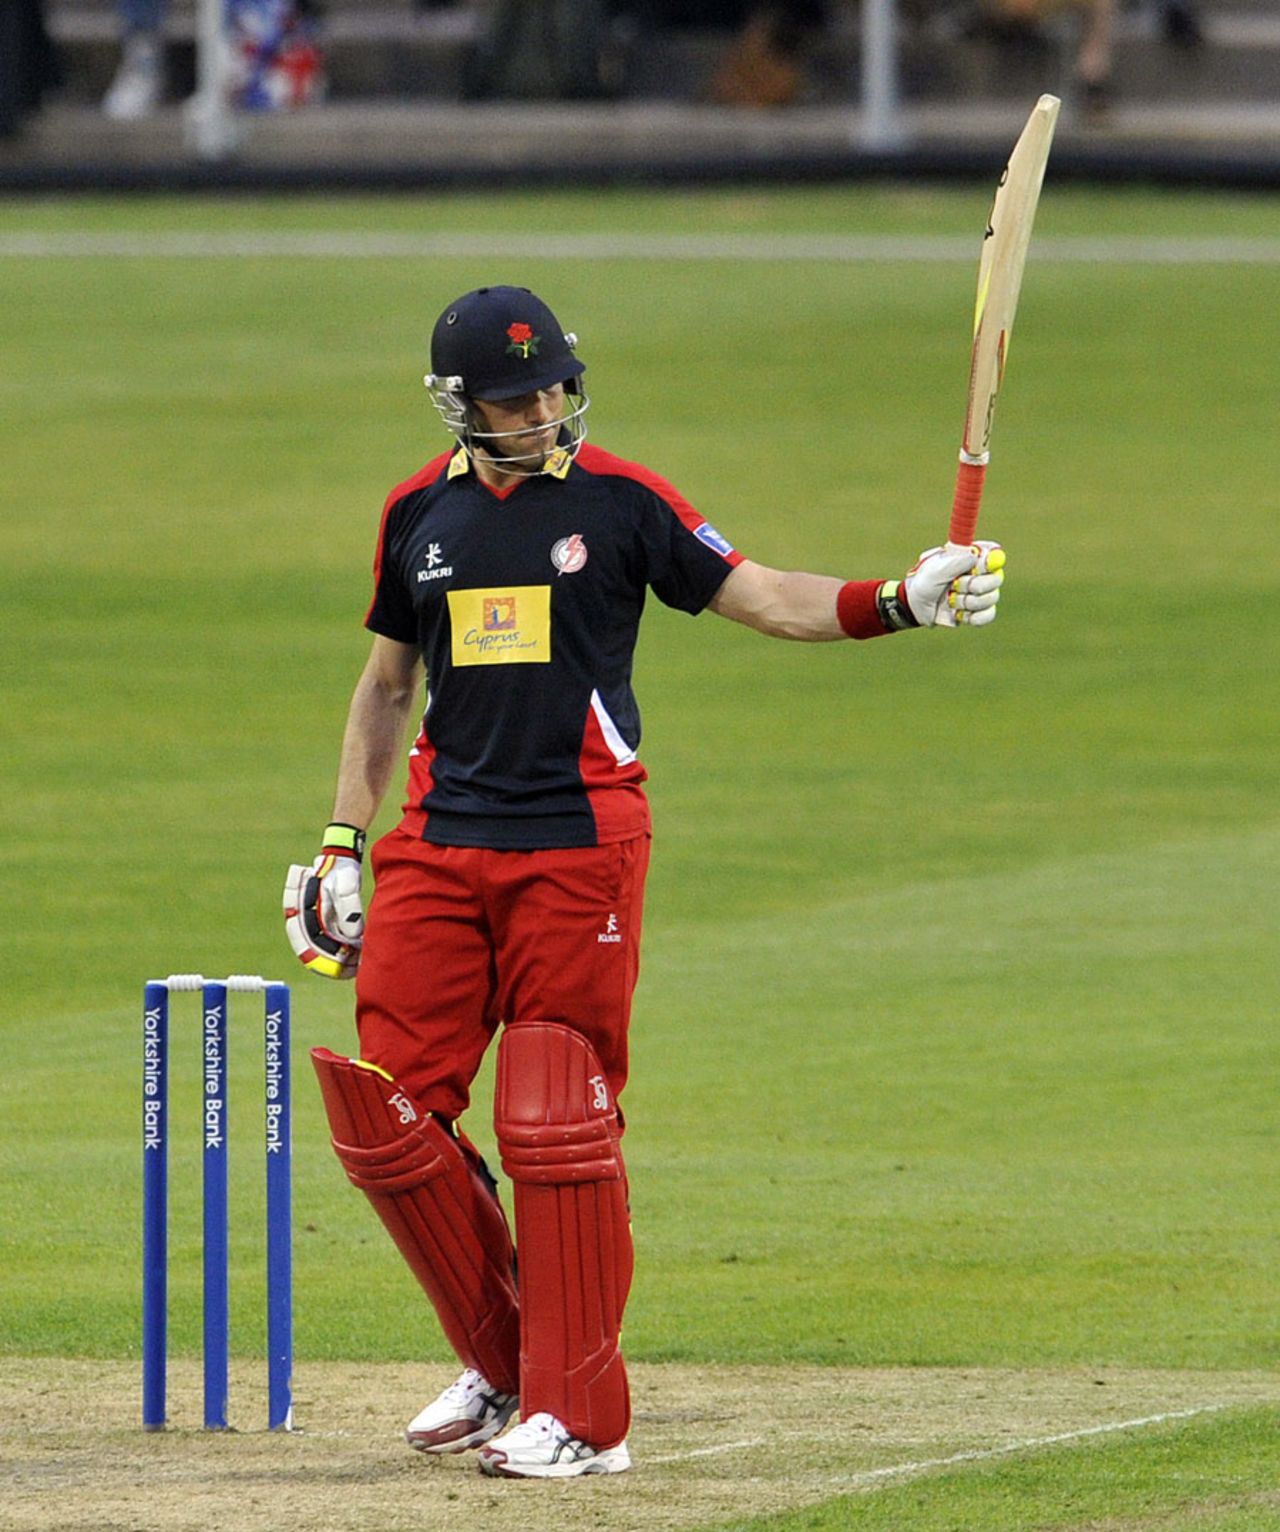 Stephen Moore raises his bat after reaching fifty, Lancashire v Scotland, Yorkshire Bank 40, Group B, Old Trafford, June 18, 2013